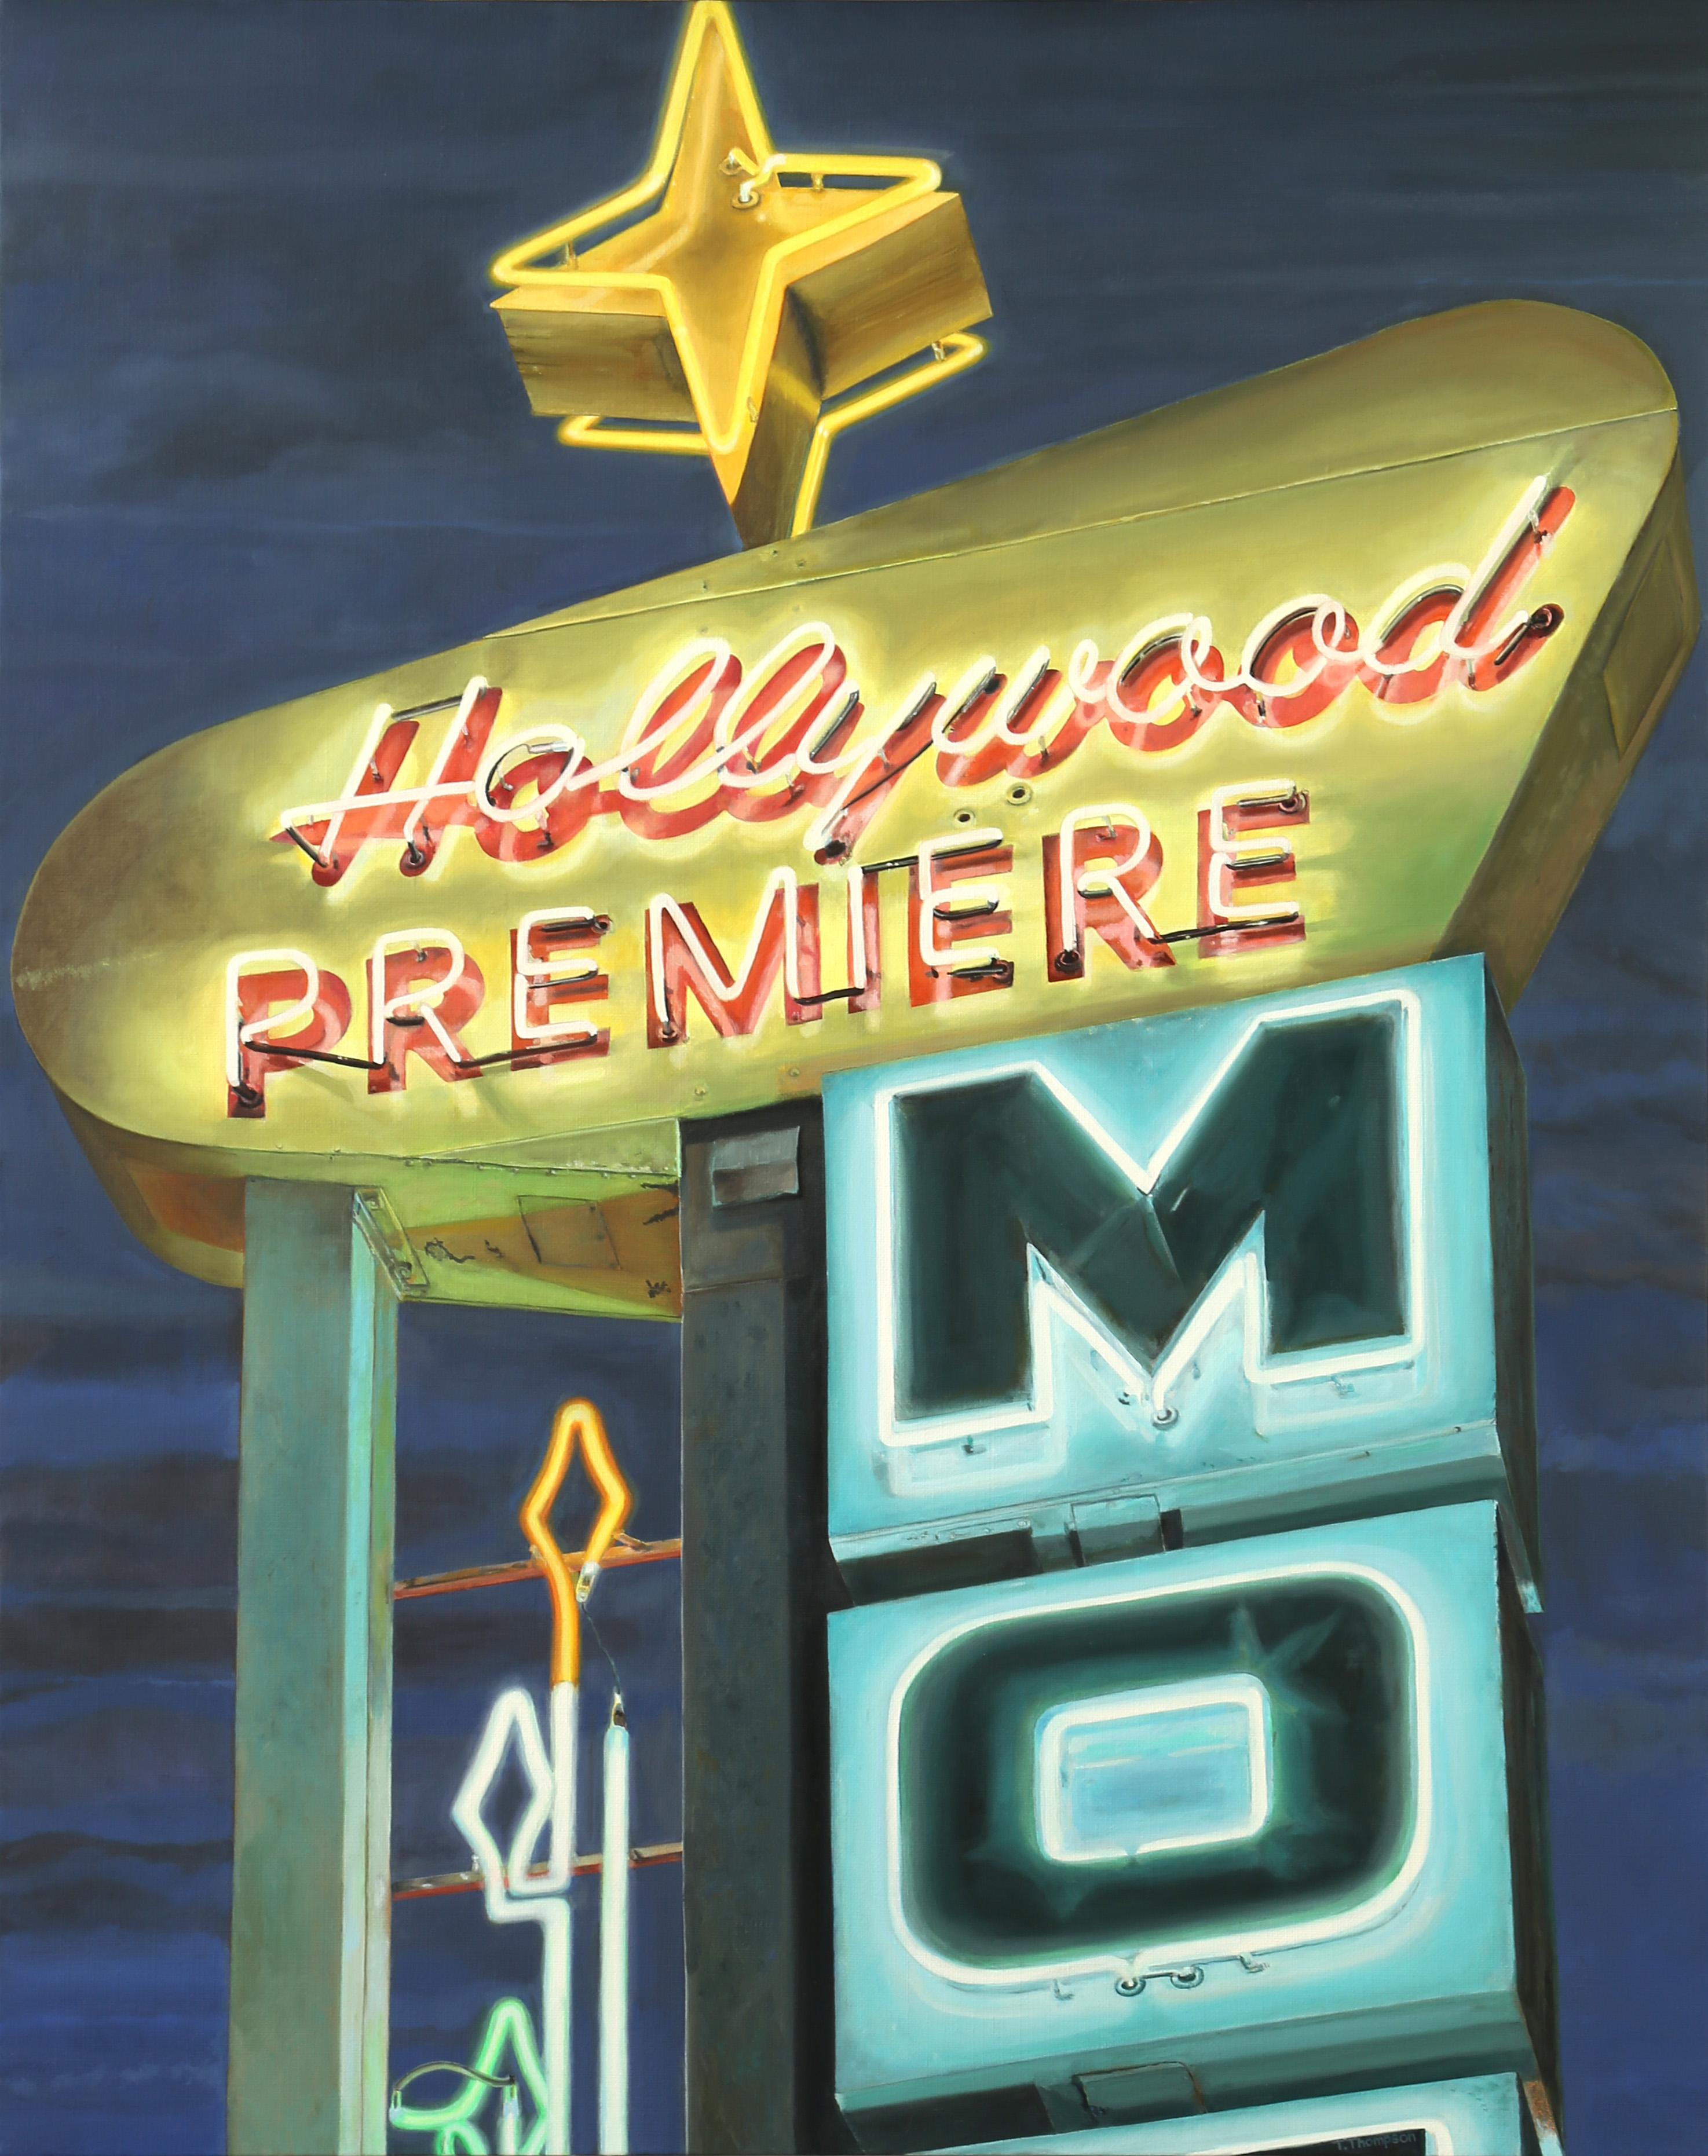 Hollywood Premiere - Painting by Terry Thompson